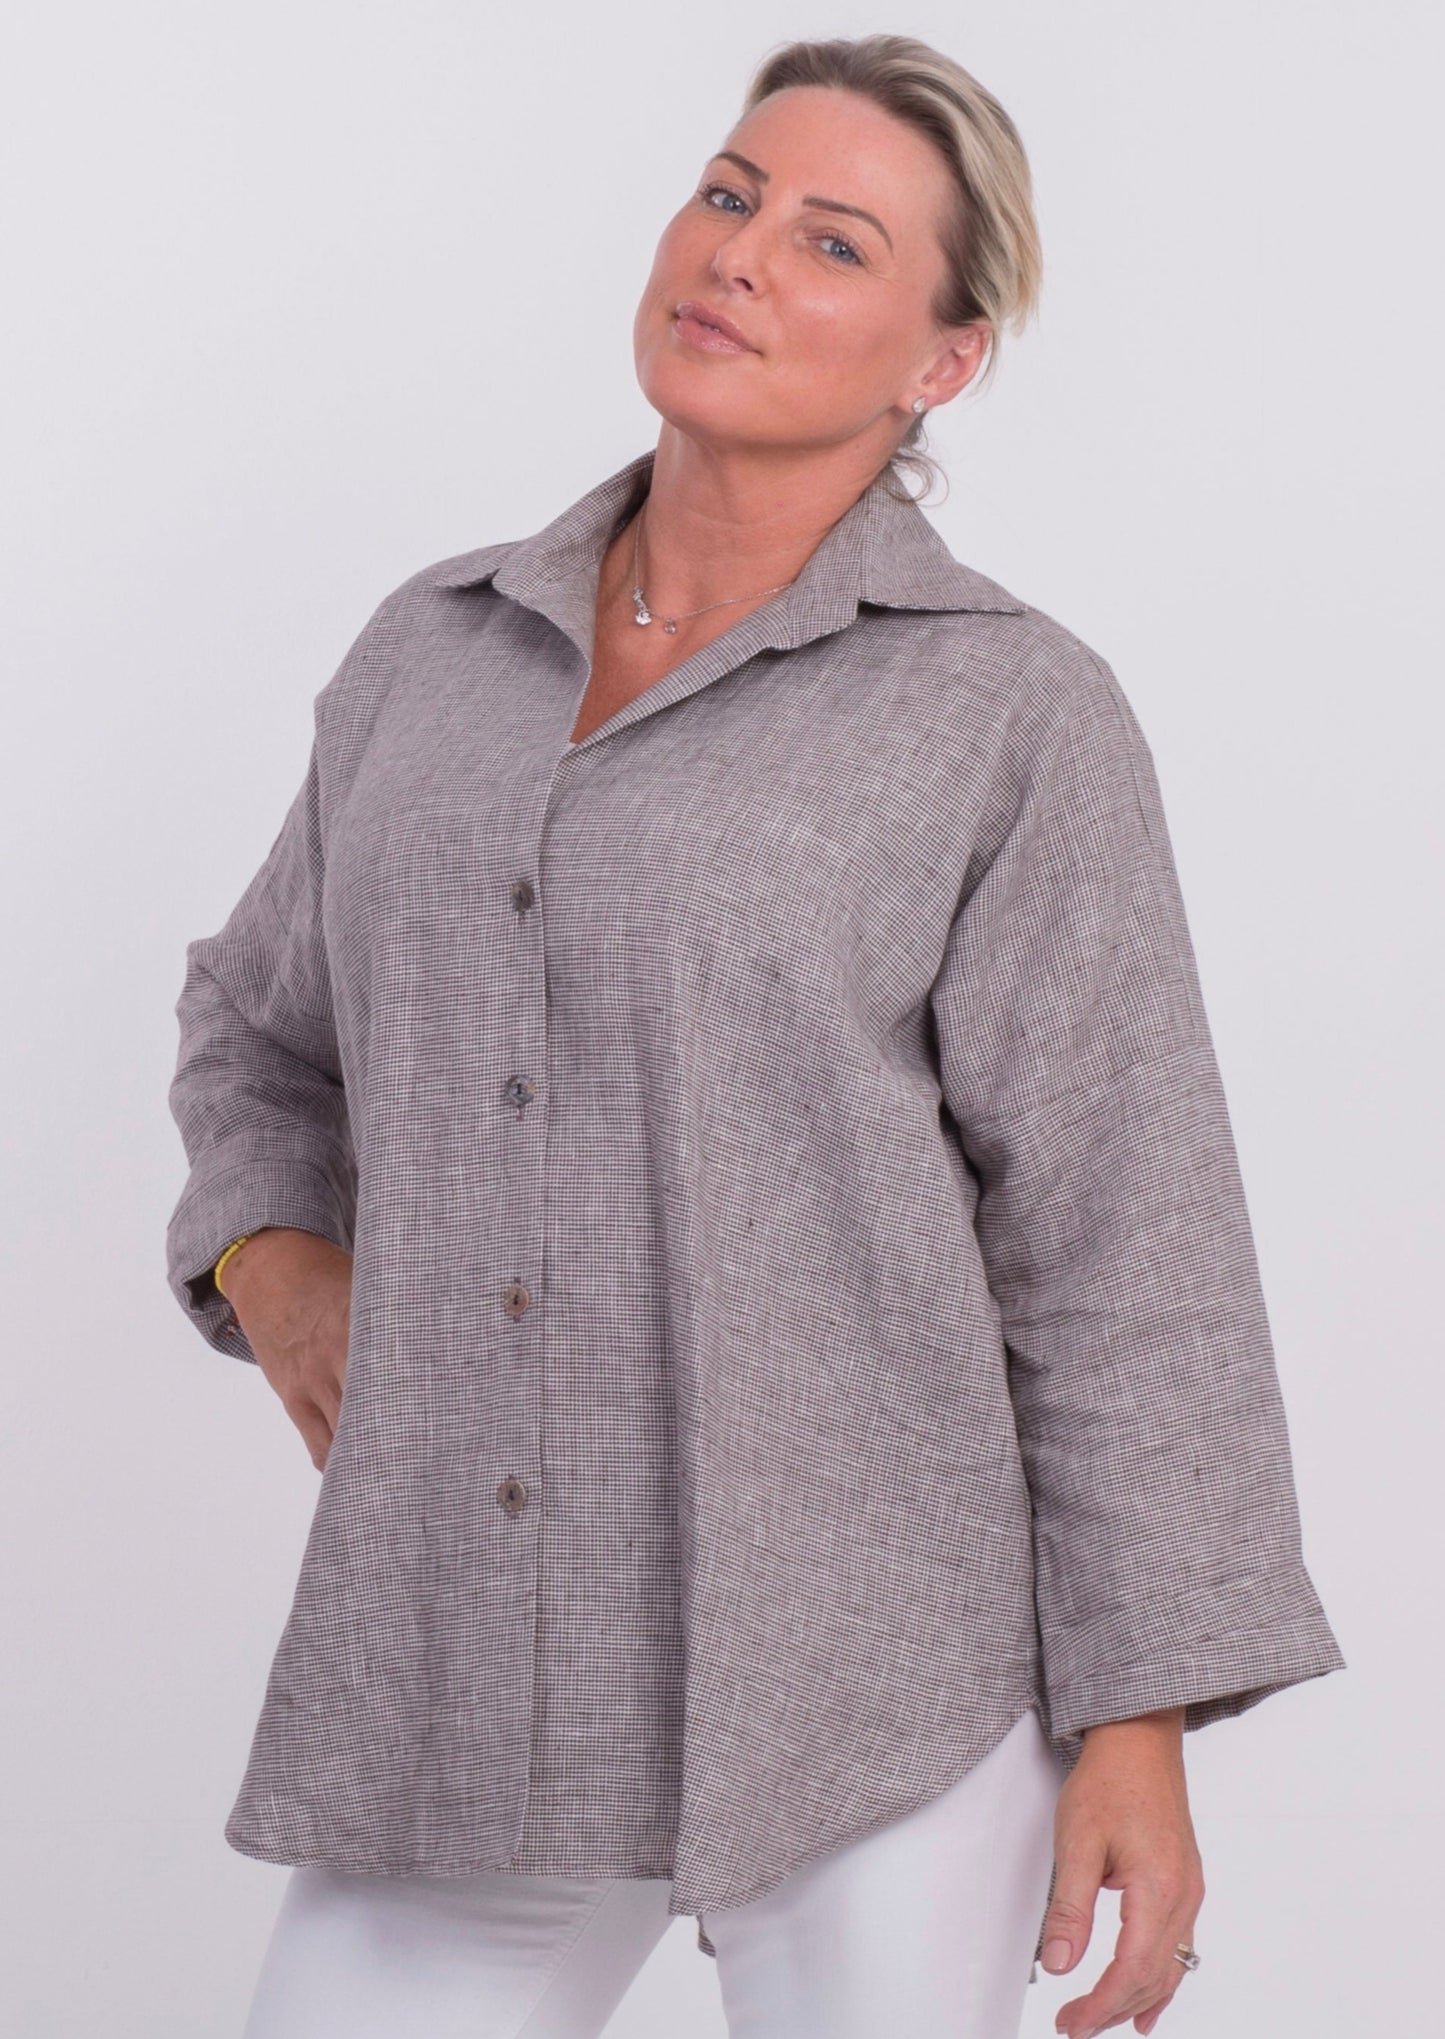 THE SOHO OVERSIZED SHIRT IN COFFEE AND IVORY CHECK LINEN